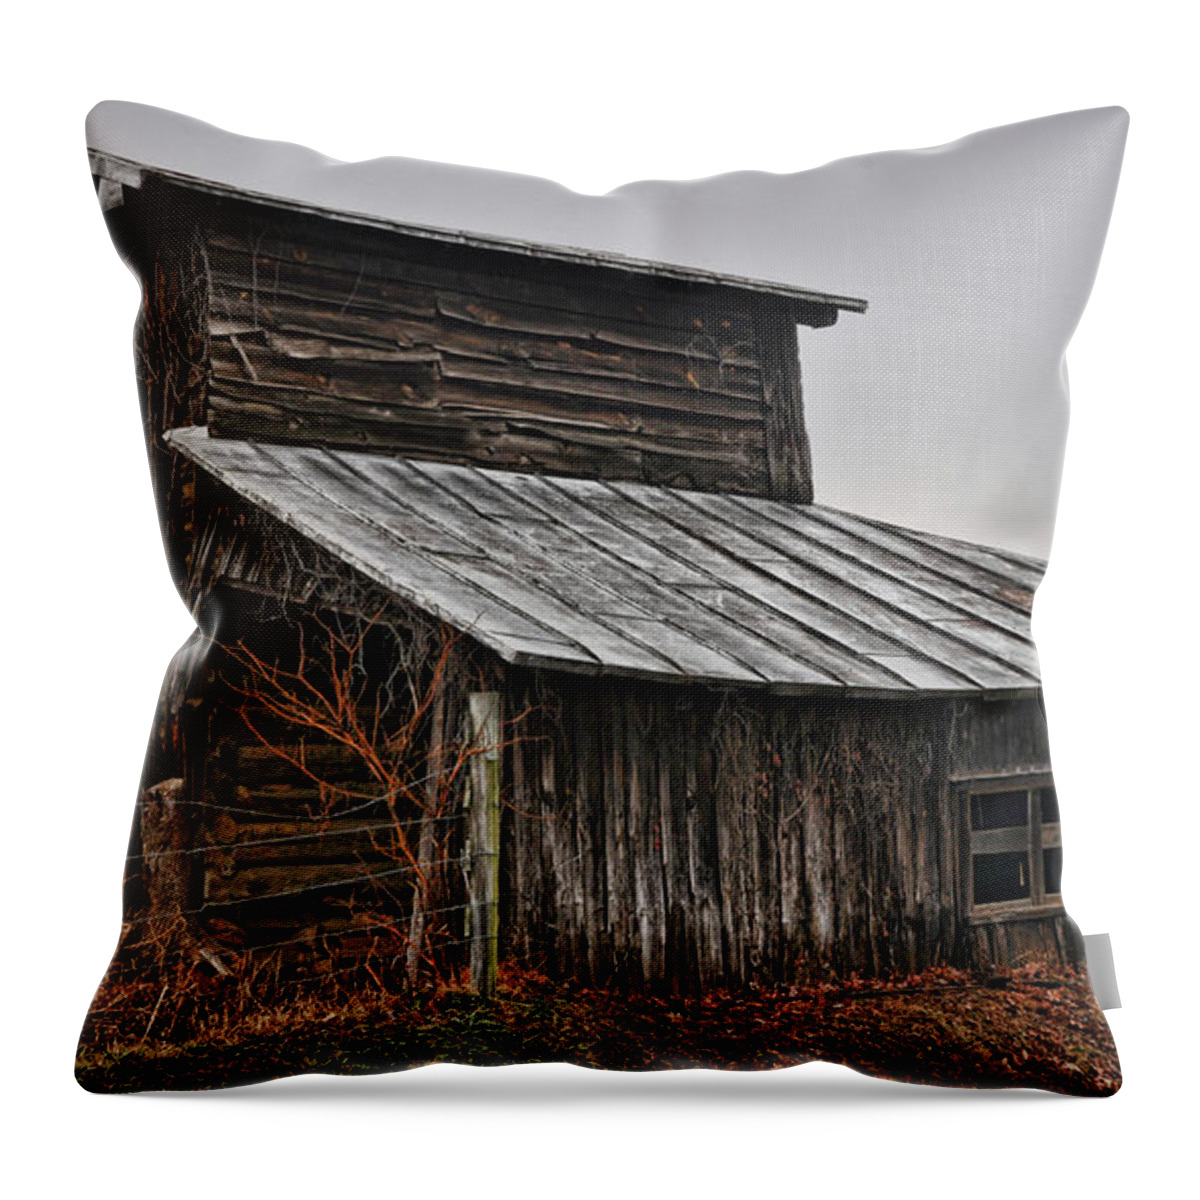 Barn Throw Pillow featuring the photograph Sway Backed Barn by Randy Rogers